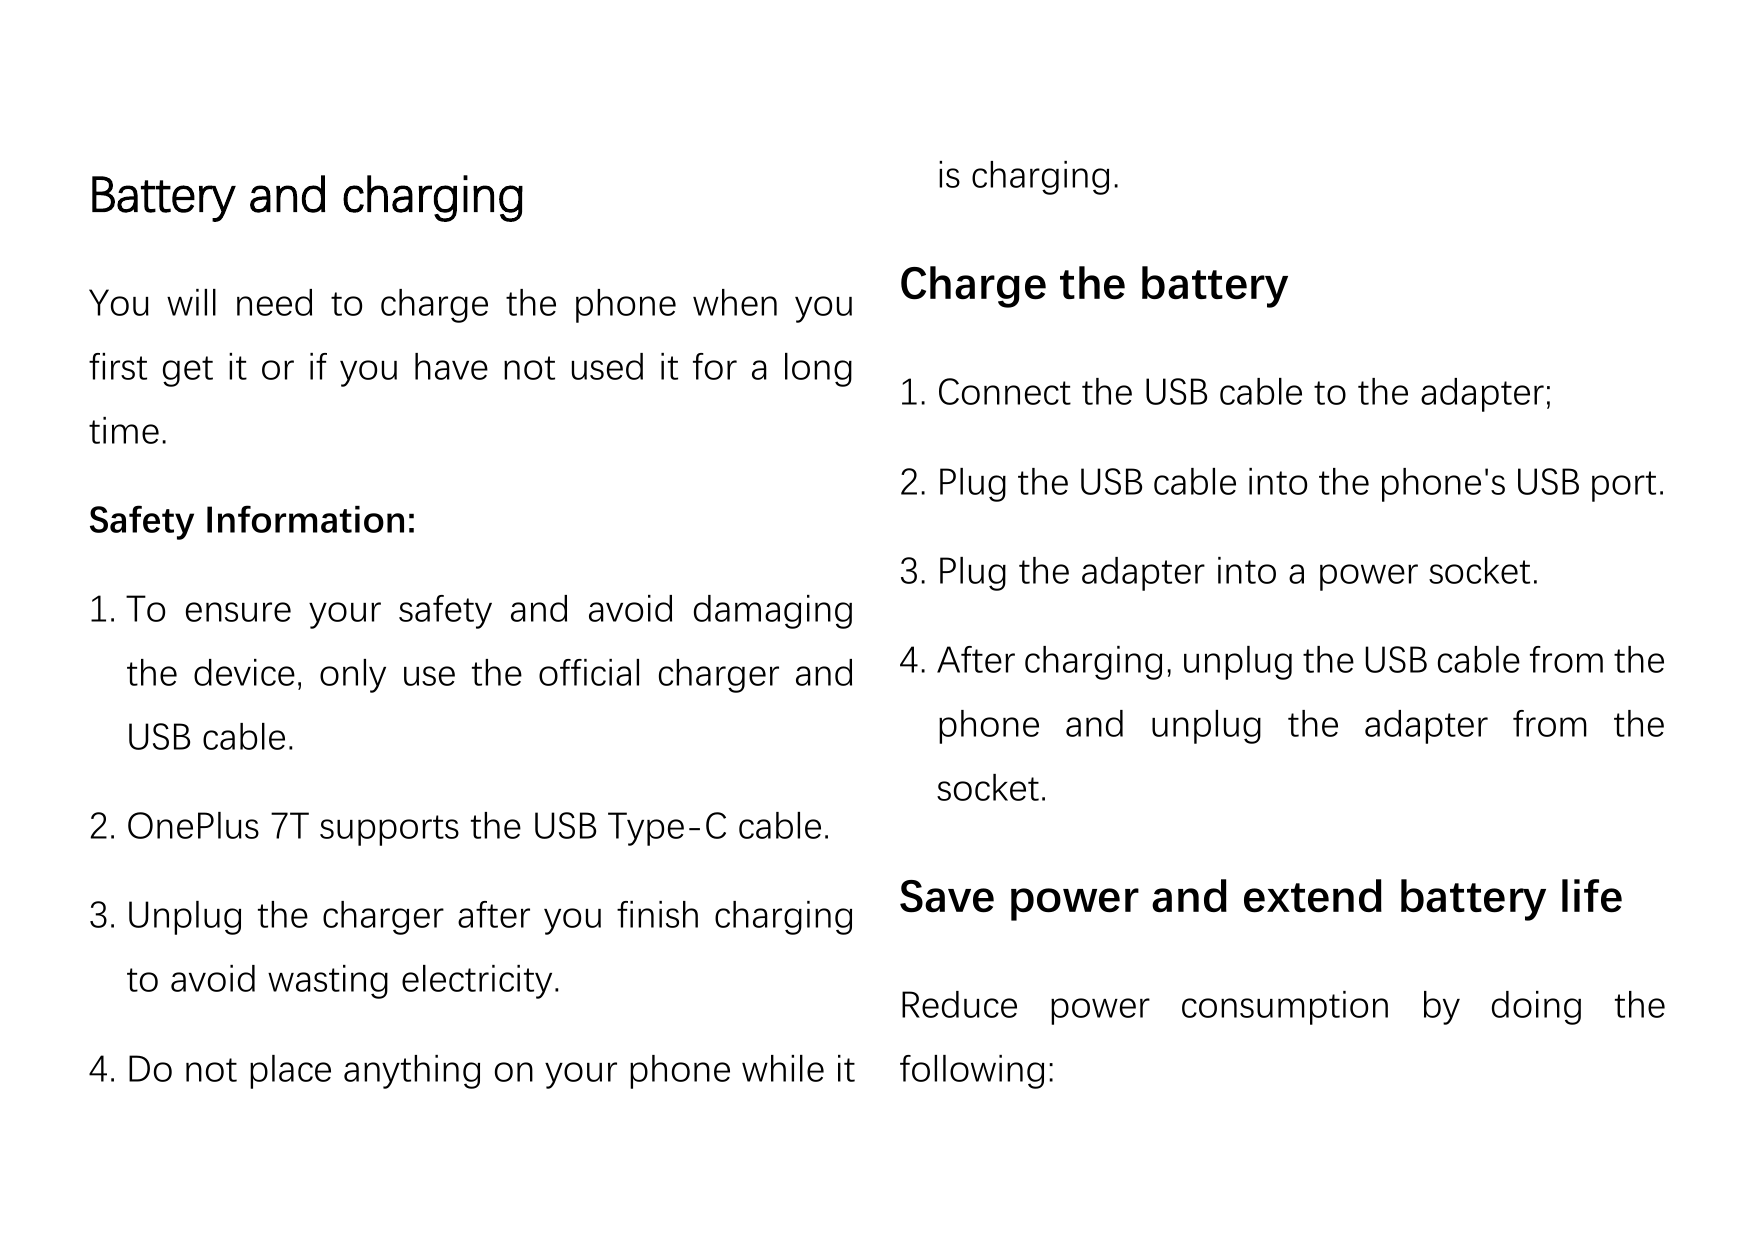 Battery and chargingYou will need to charge the phone when youfirst get it or if you have not used it for a longtime.Safety Info